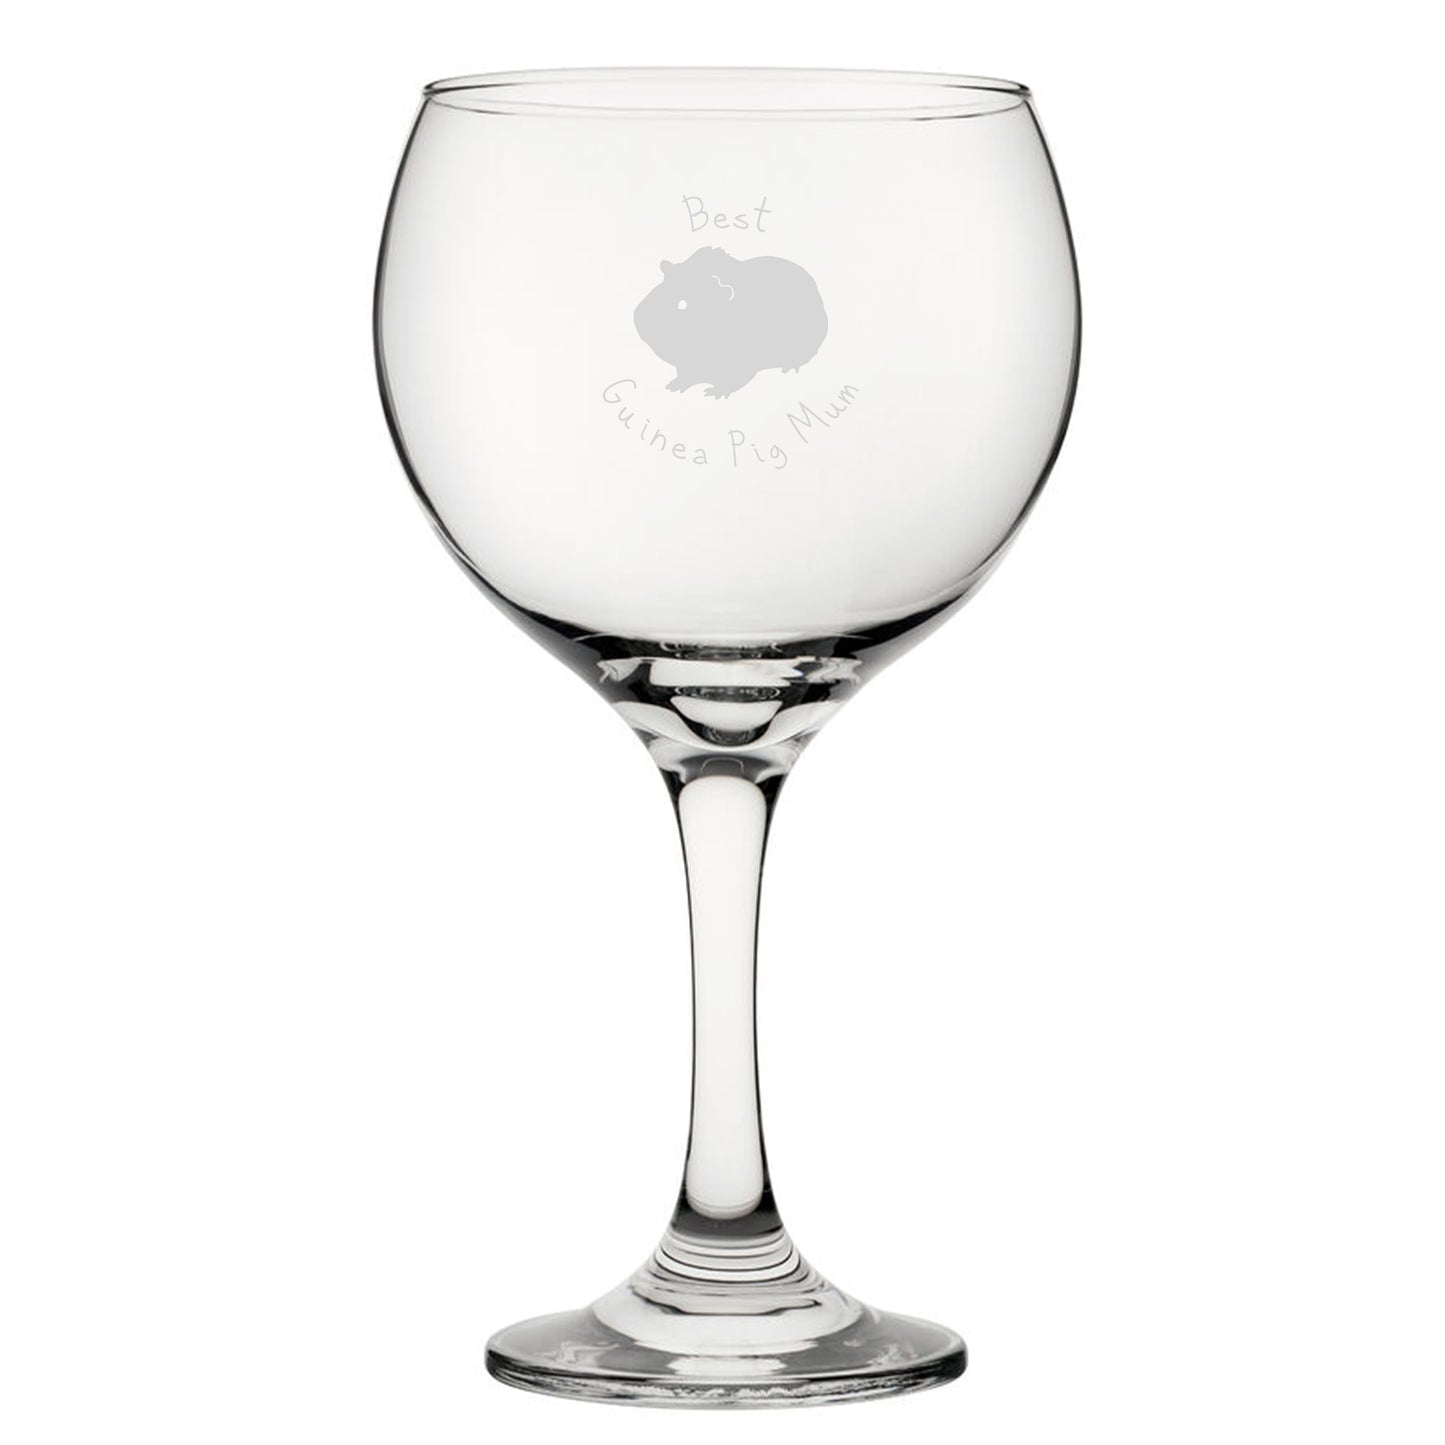 Best Guinea Pig Dad - Engraved Novelty Gin Balloon Cocktail Glass Image 1